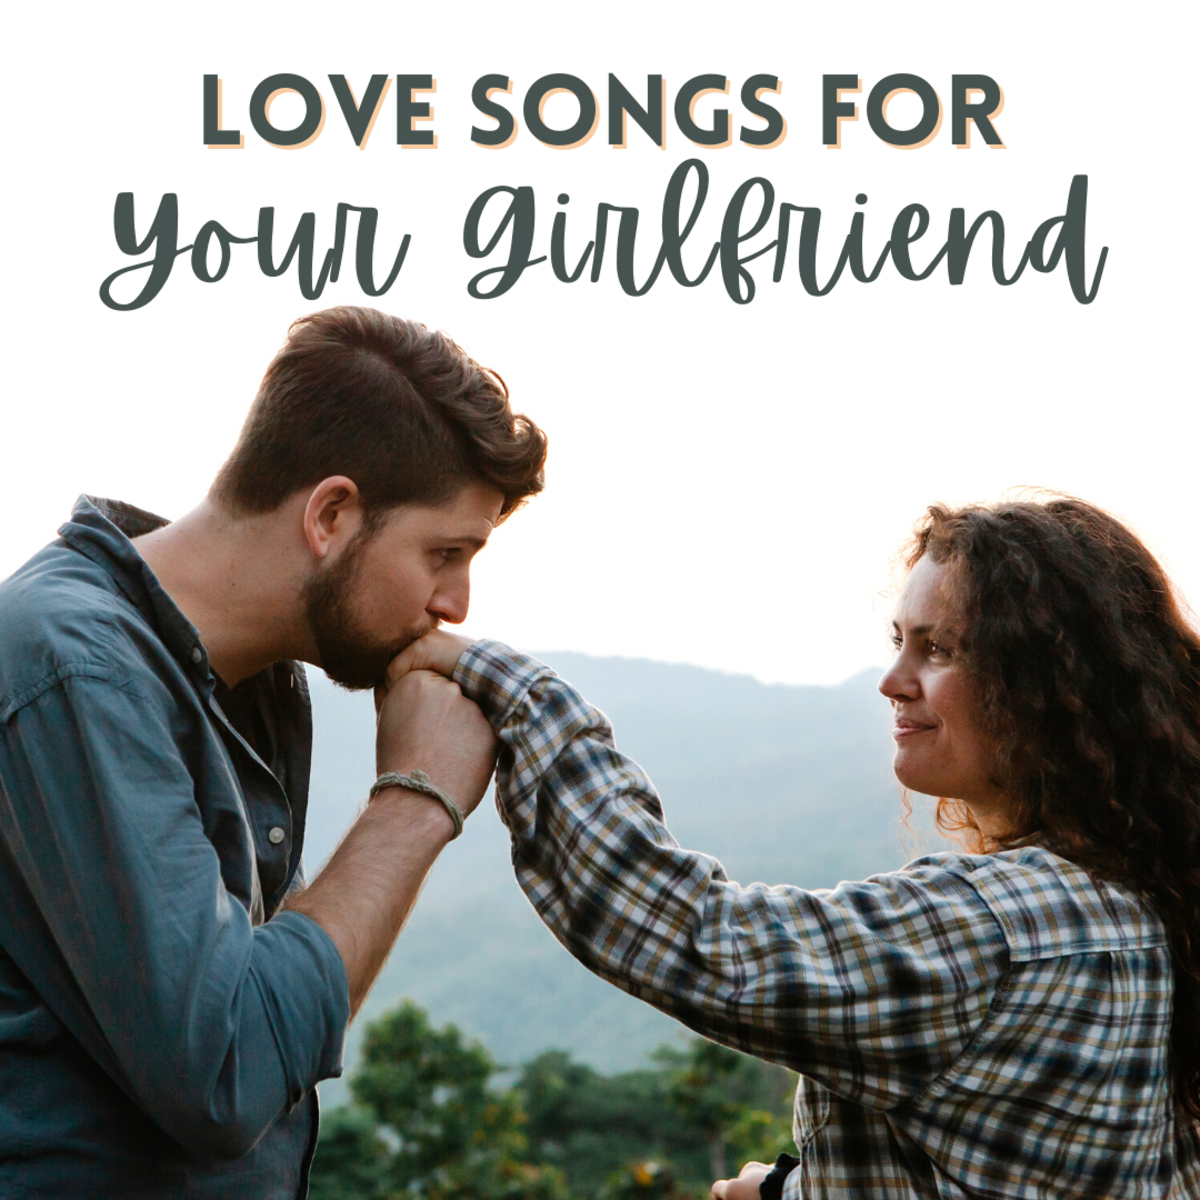 Looking for songs to dedicate to your girlfriend? Here are 100 thoughtful love songs for your consideration!